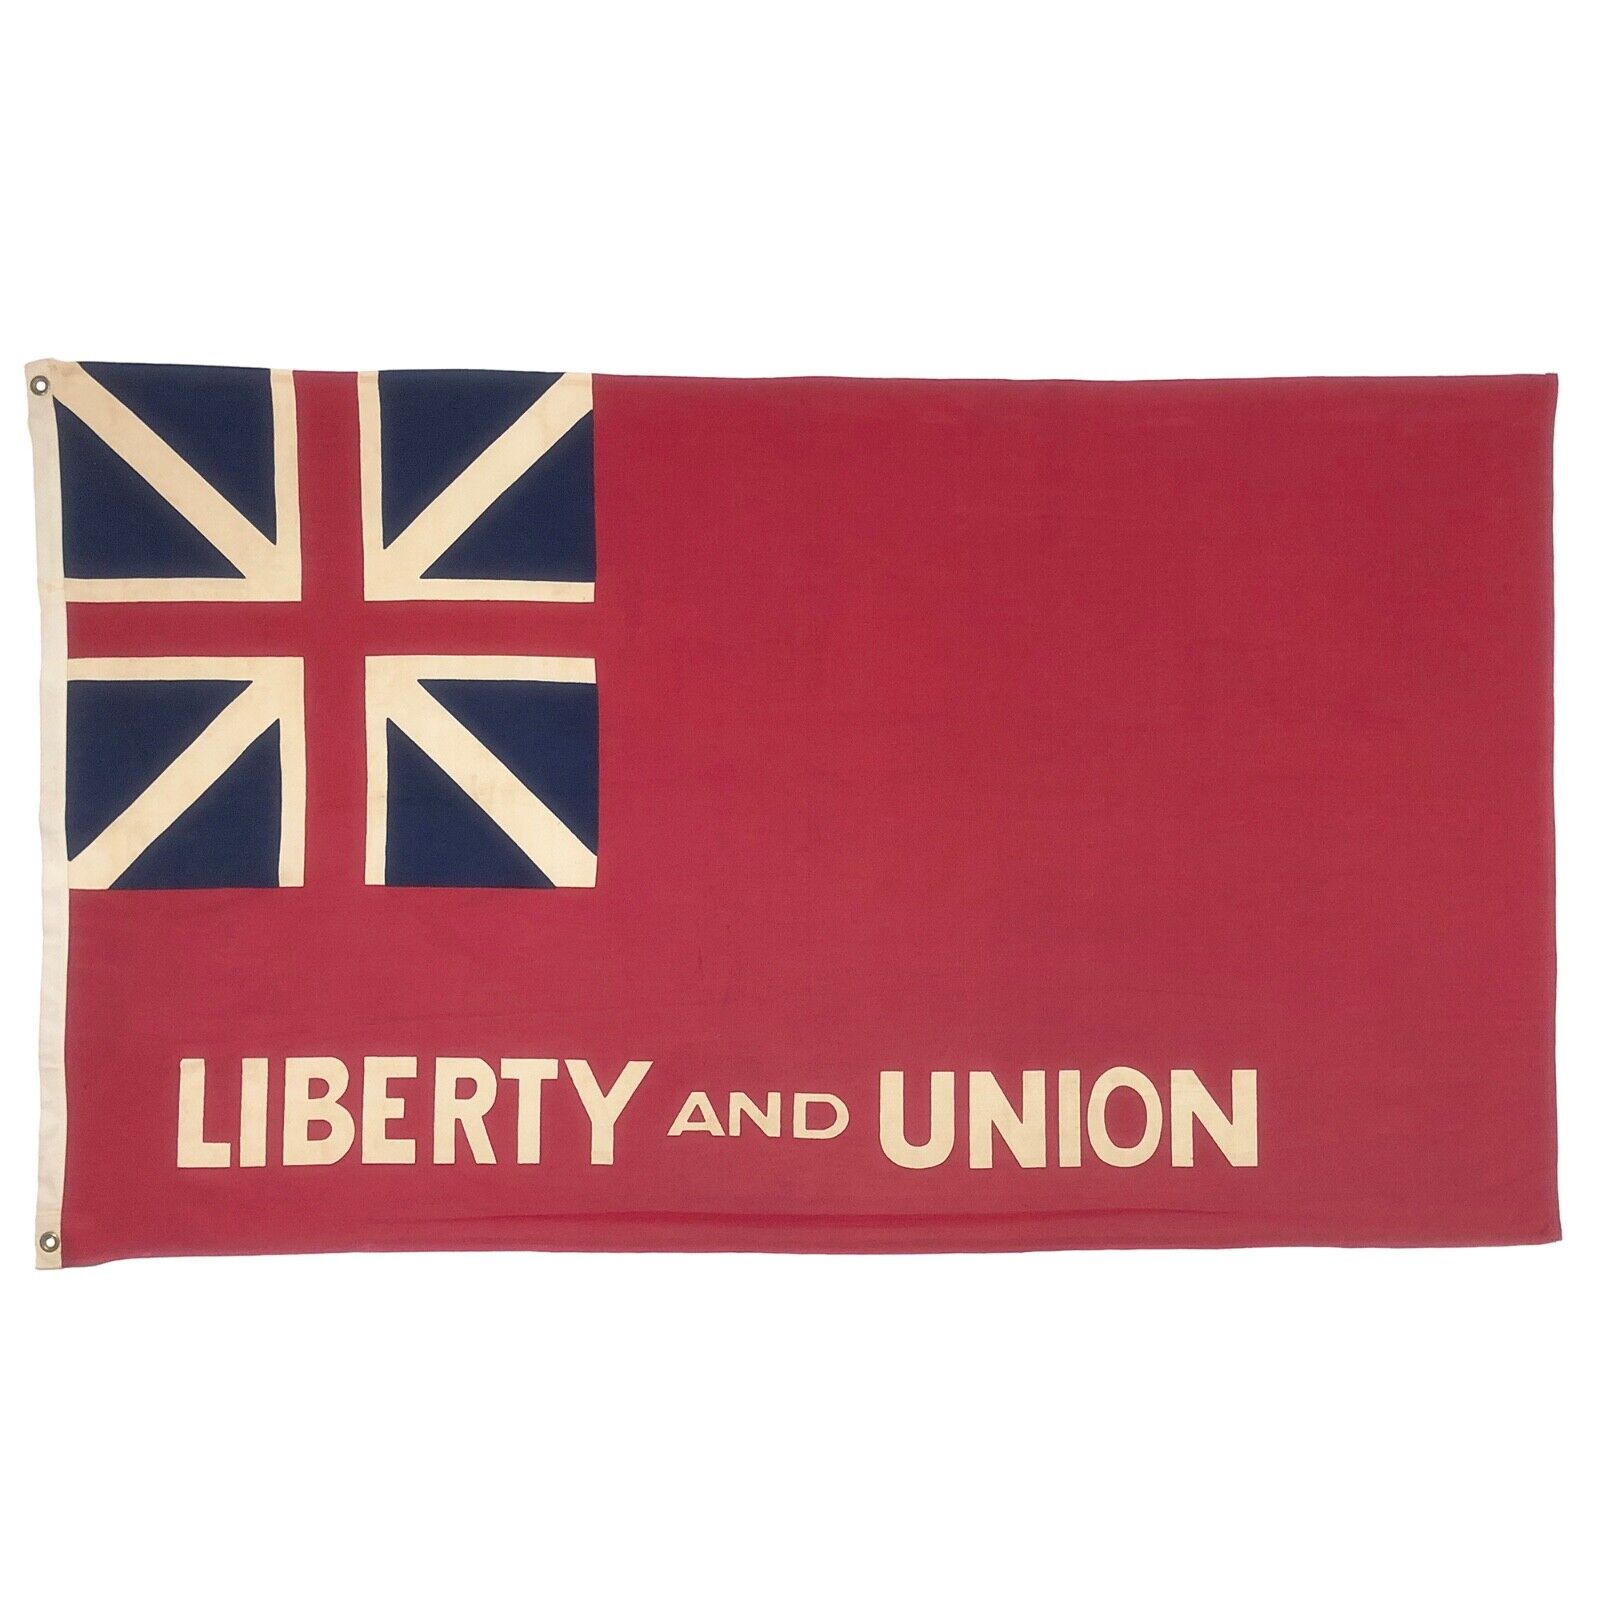 Vintage Cotton American Liberty and Union Taunton Massachusetts Cloth Red Ensign